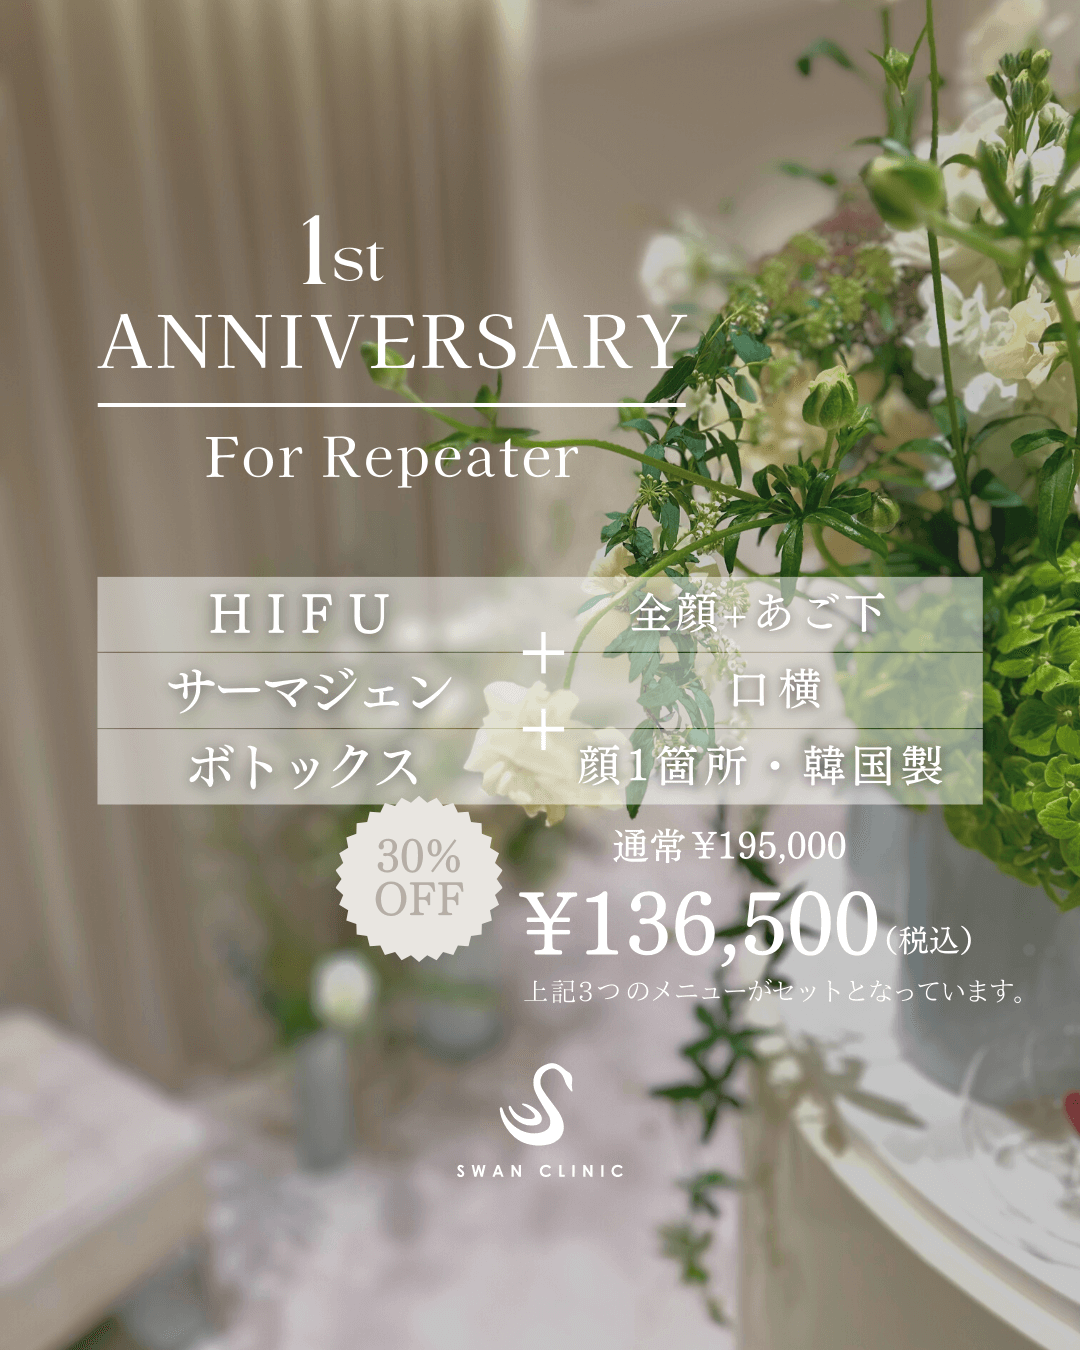 1st ANNIVERSARY　For Repeater